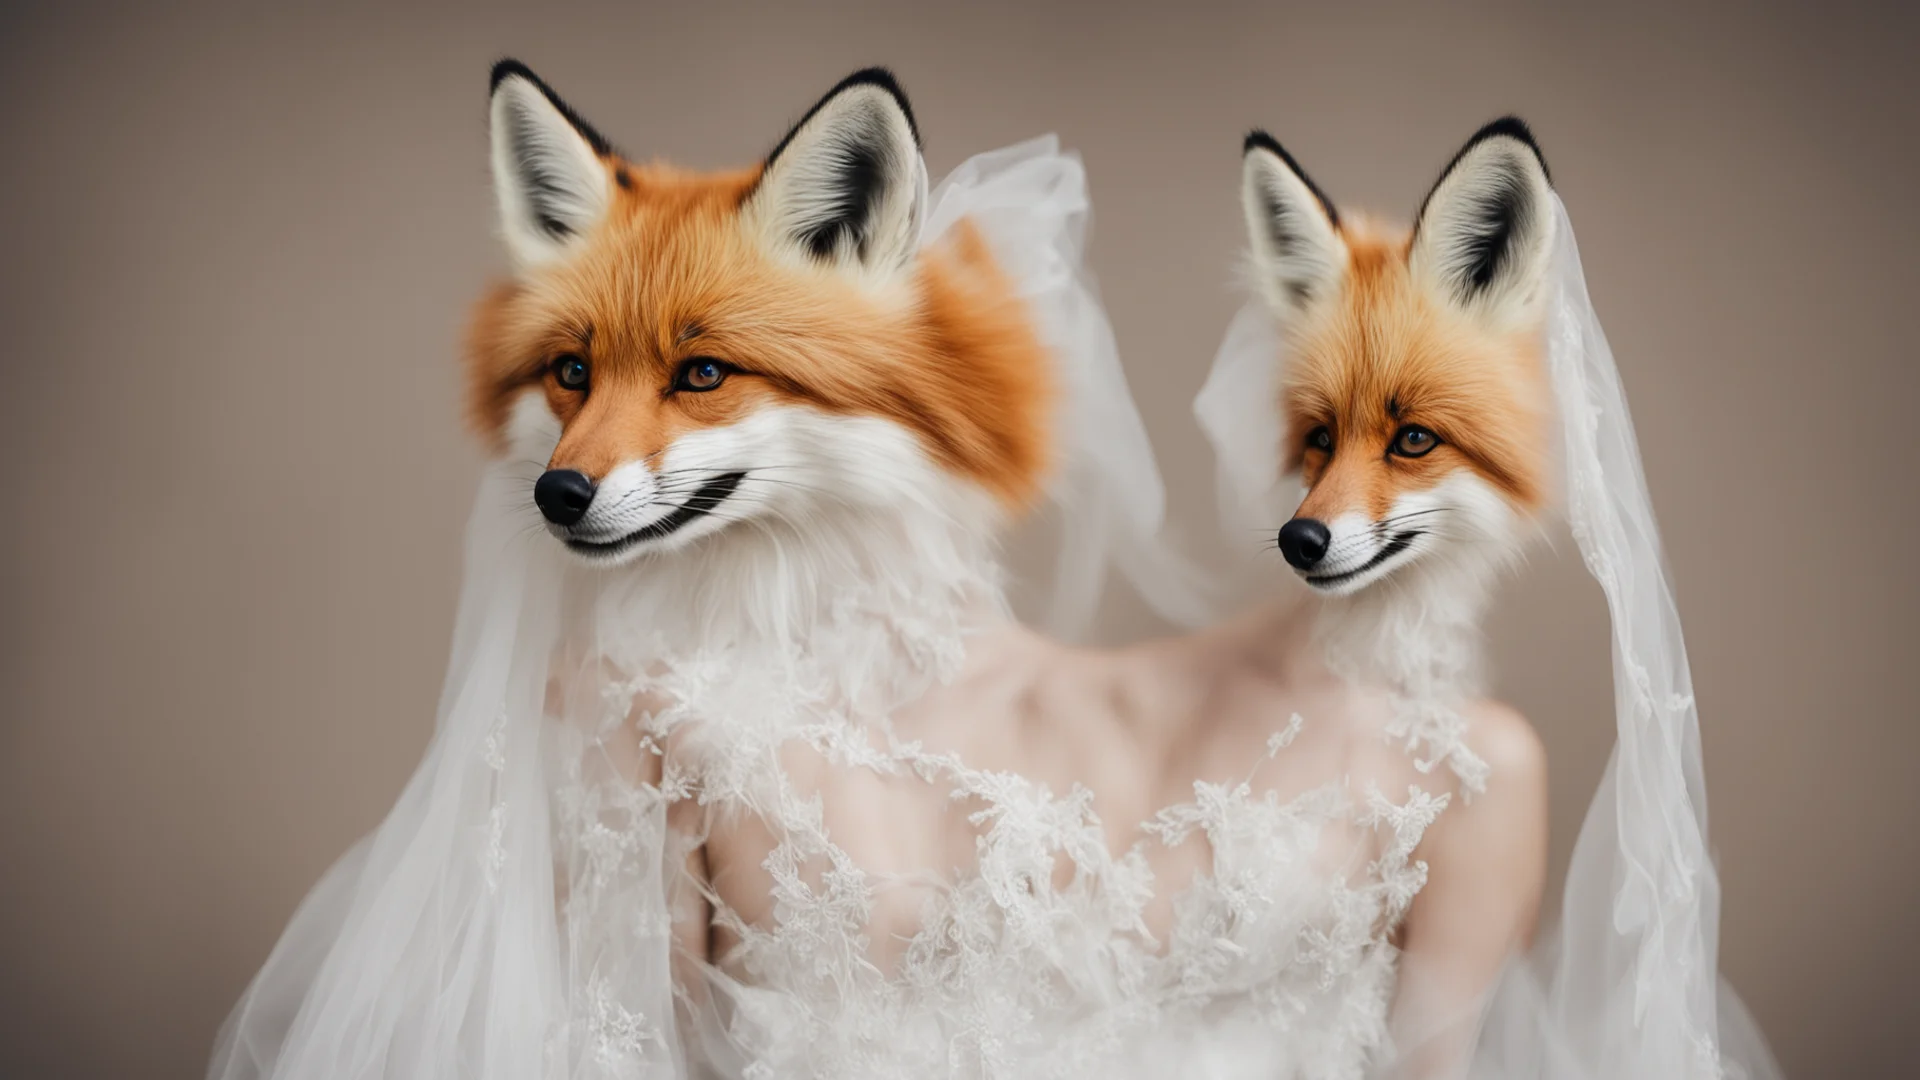 aiartstation art fox furry bride amazing awesome portrait 2 confident engaging wow 3 wide